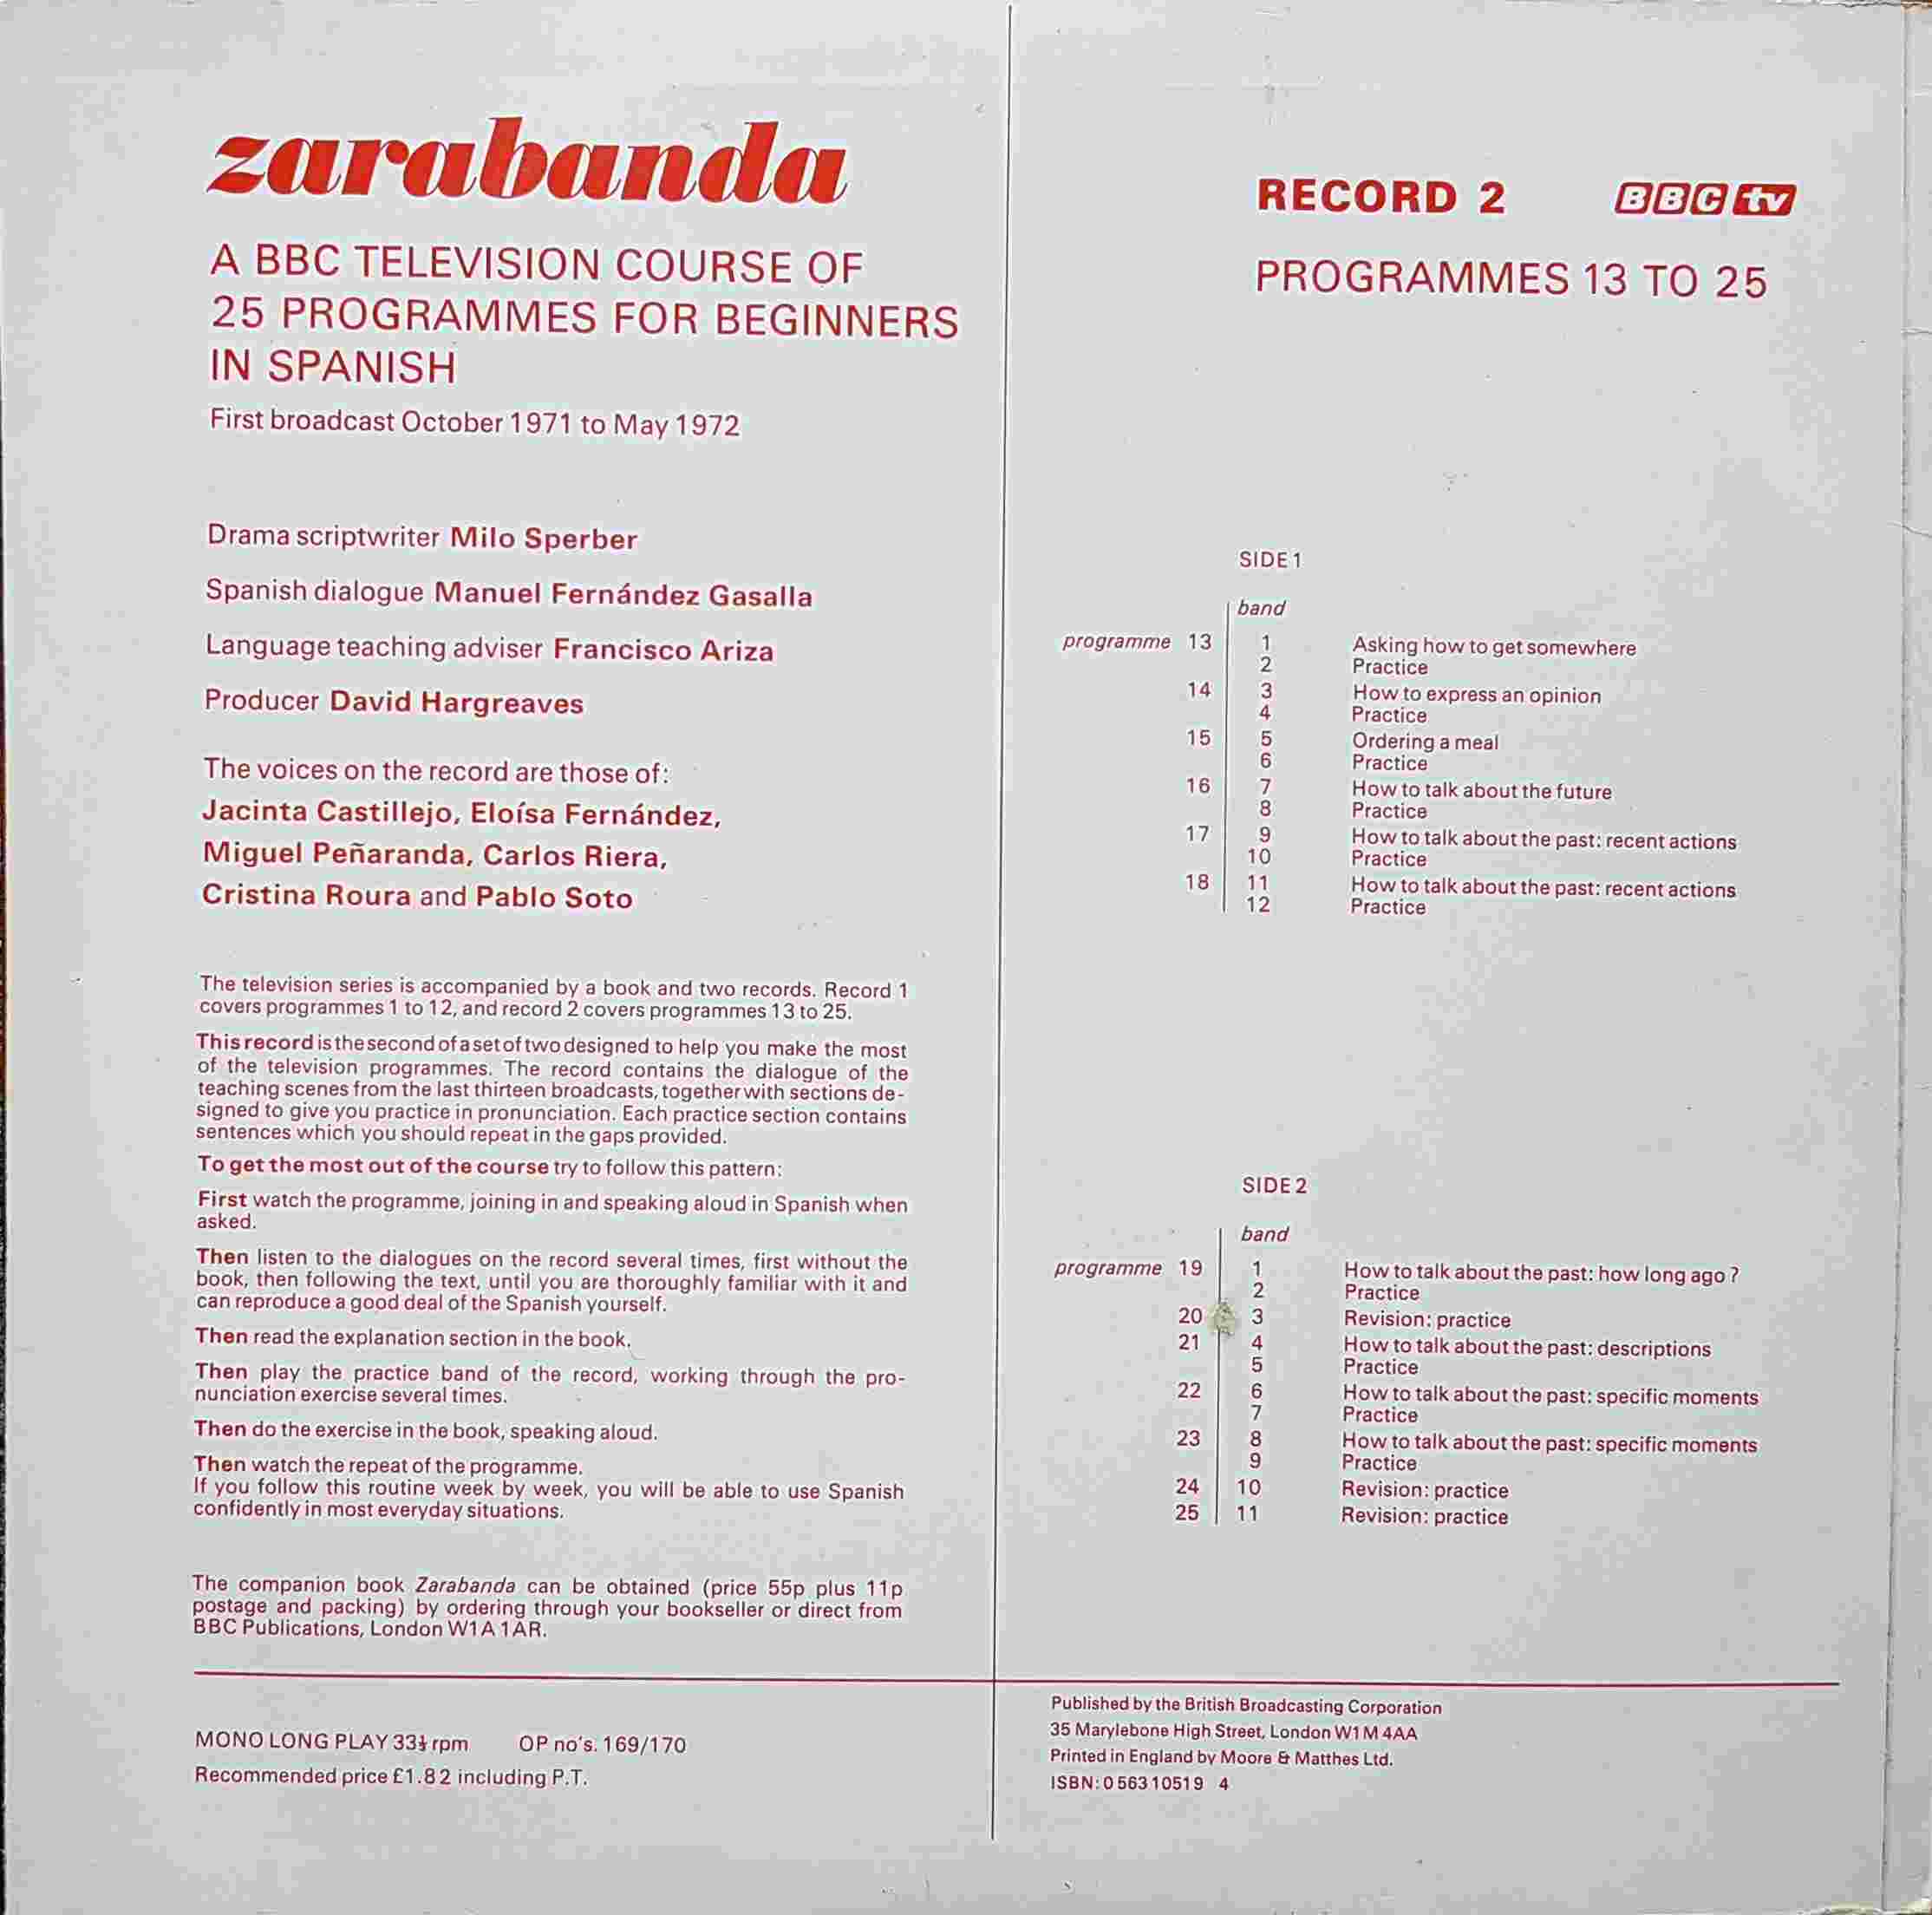 Picture of OP 169/170 Zarabanda - A BBC Television course of 25 programmes for beginners in Spanish - Record 2 - Programmes 13 - 25 by artist Milo Sperber / Manuel Fernandez Gasalla from the BBC records and Tapes library